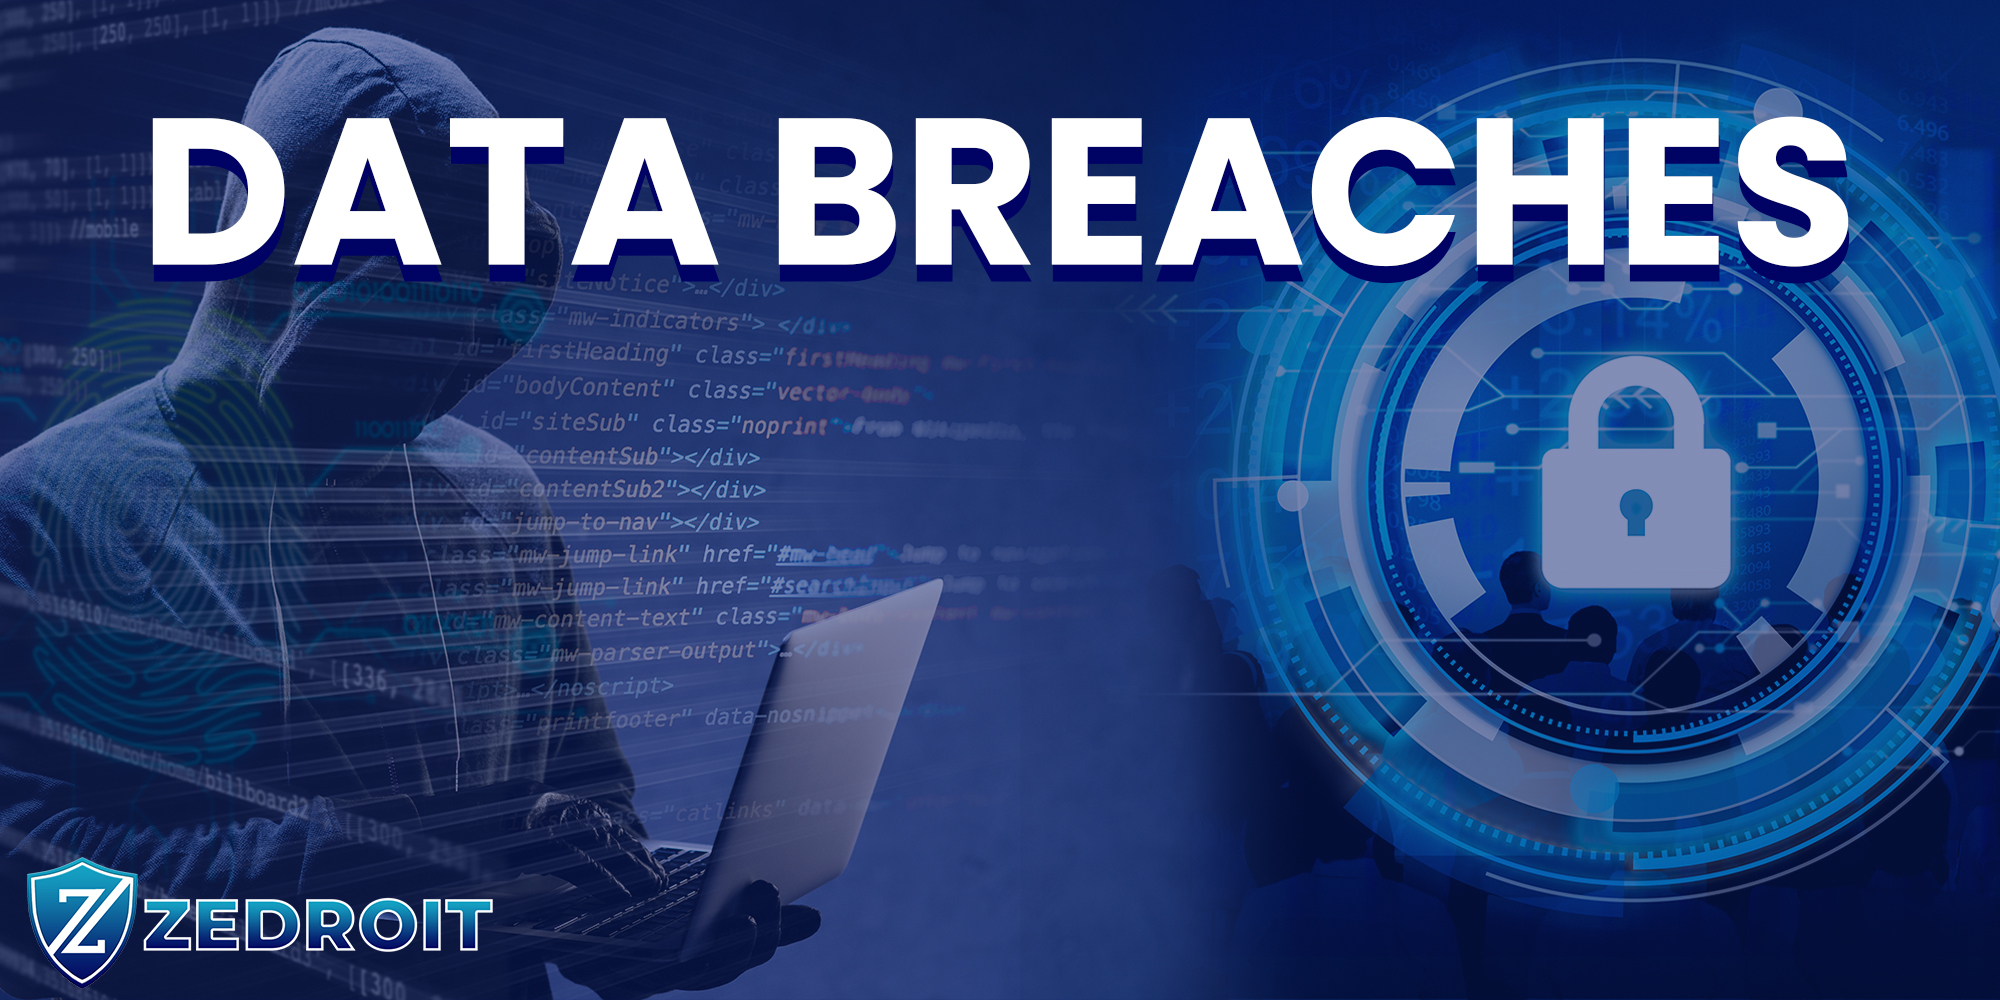 How to Respond to Data Breaches with Zedroit's Guide